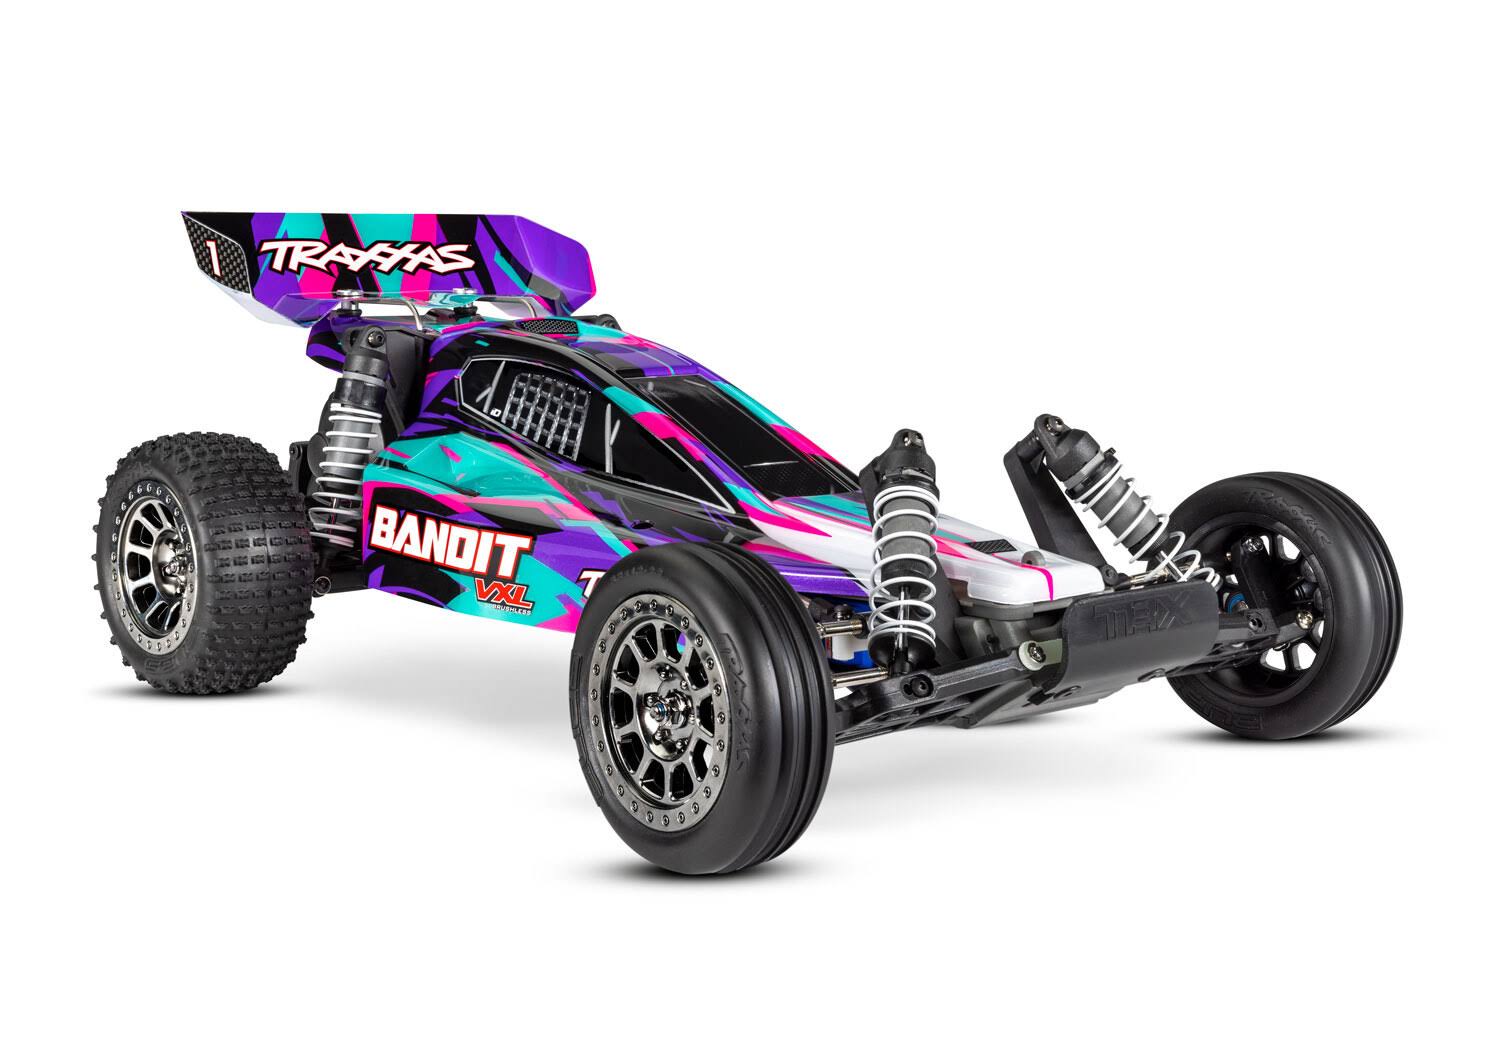 RC Traxxas Bandit 1/10 VXL 2WD Brushless RC Buggy Purple 24076-74